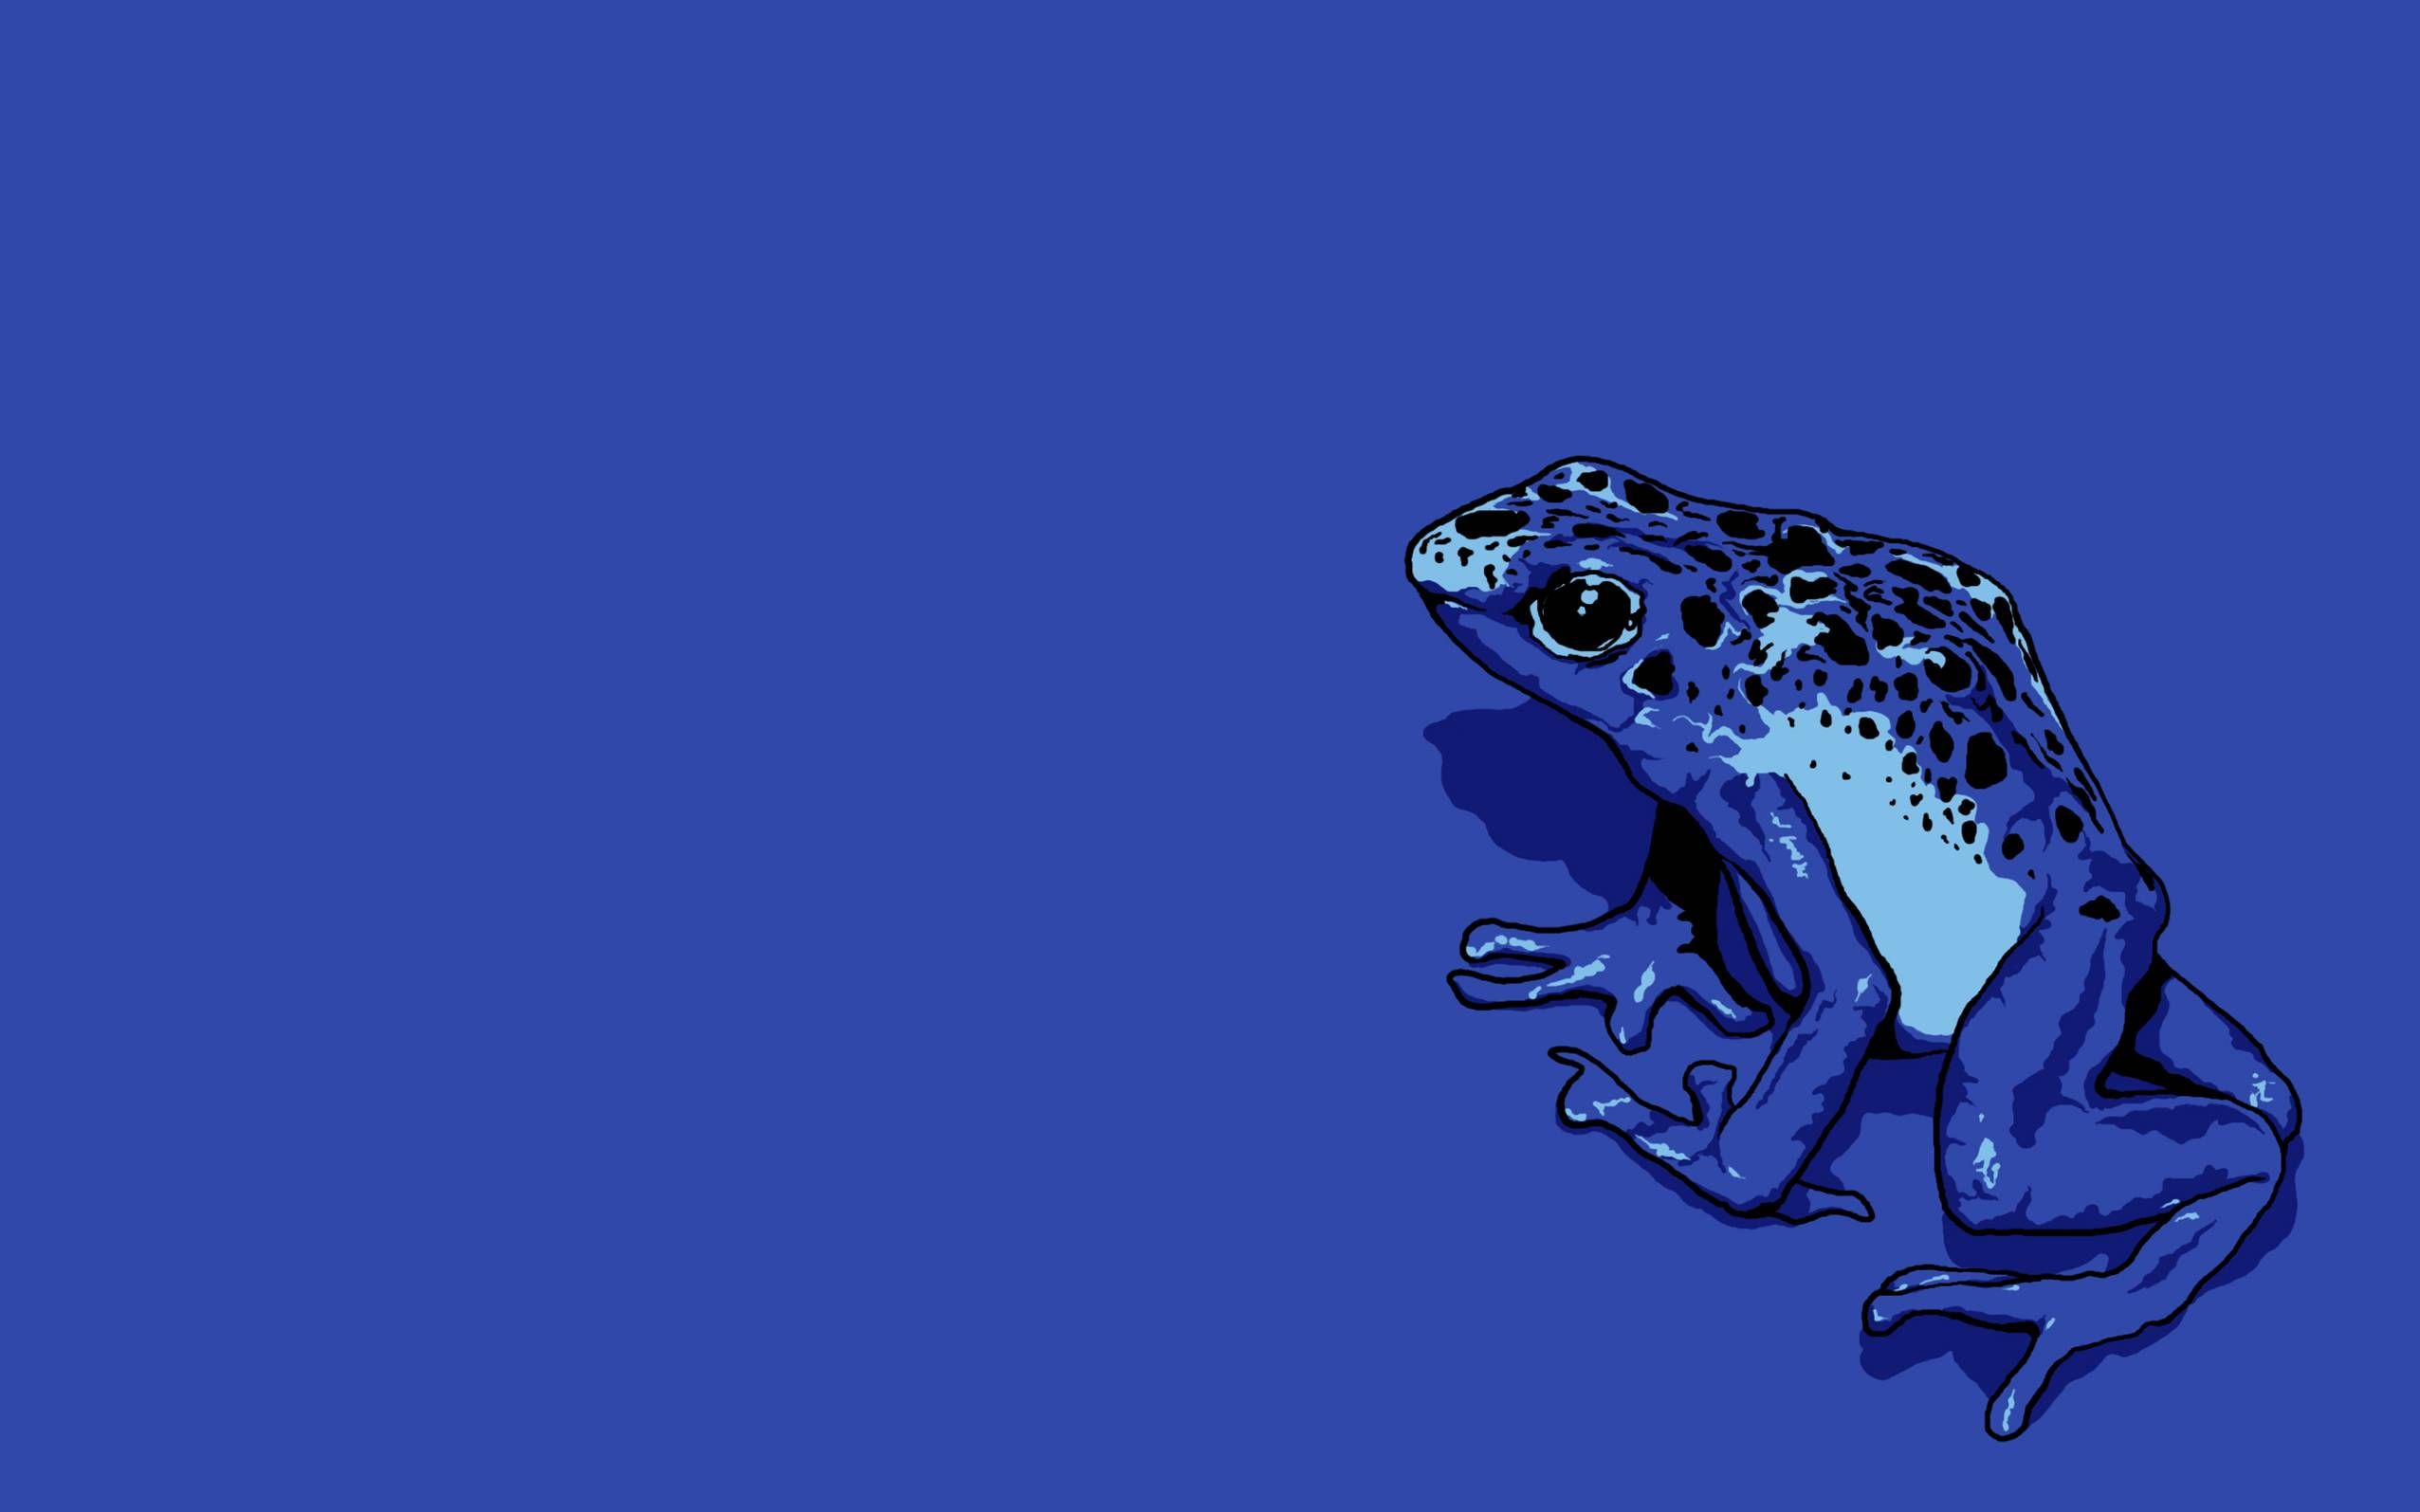 A blue frog sitting on the ground with black spots - Frog